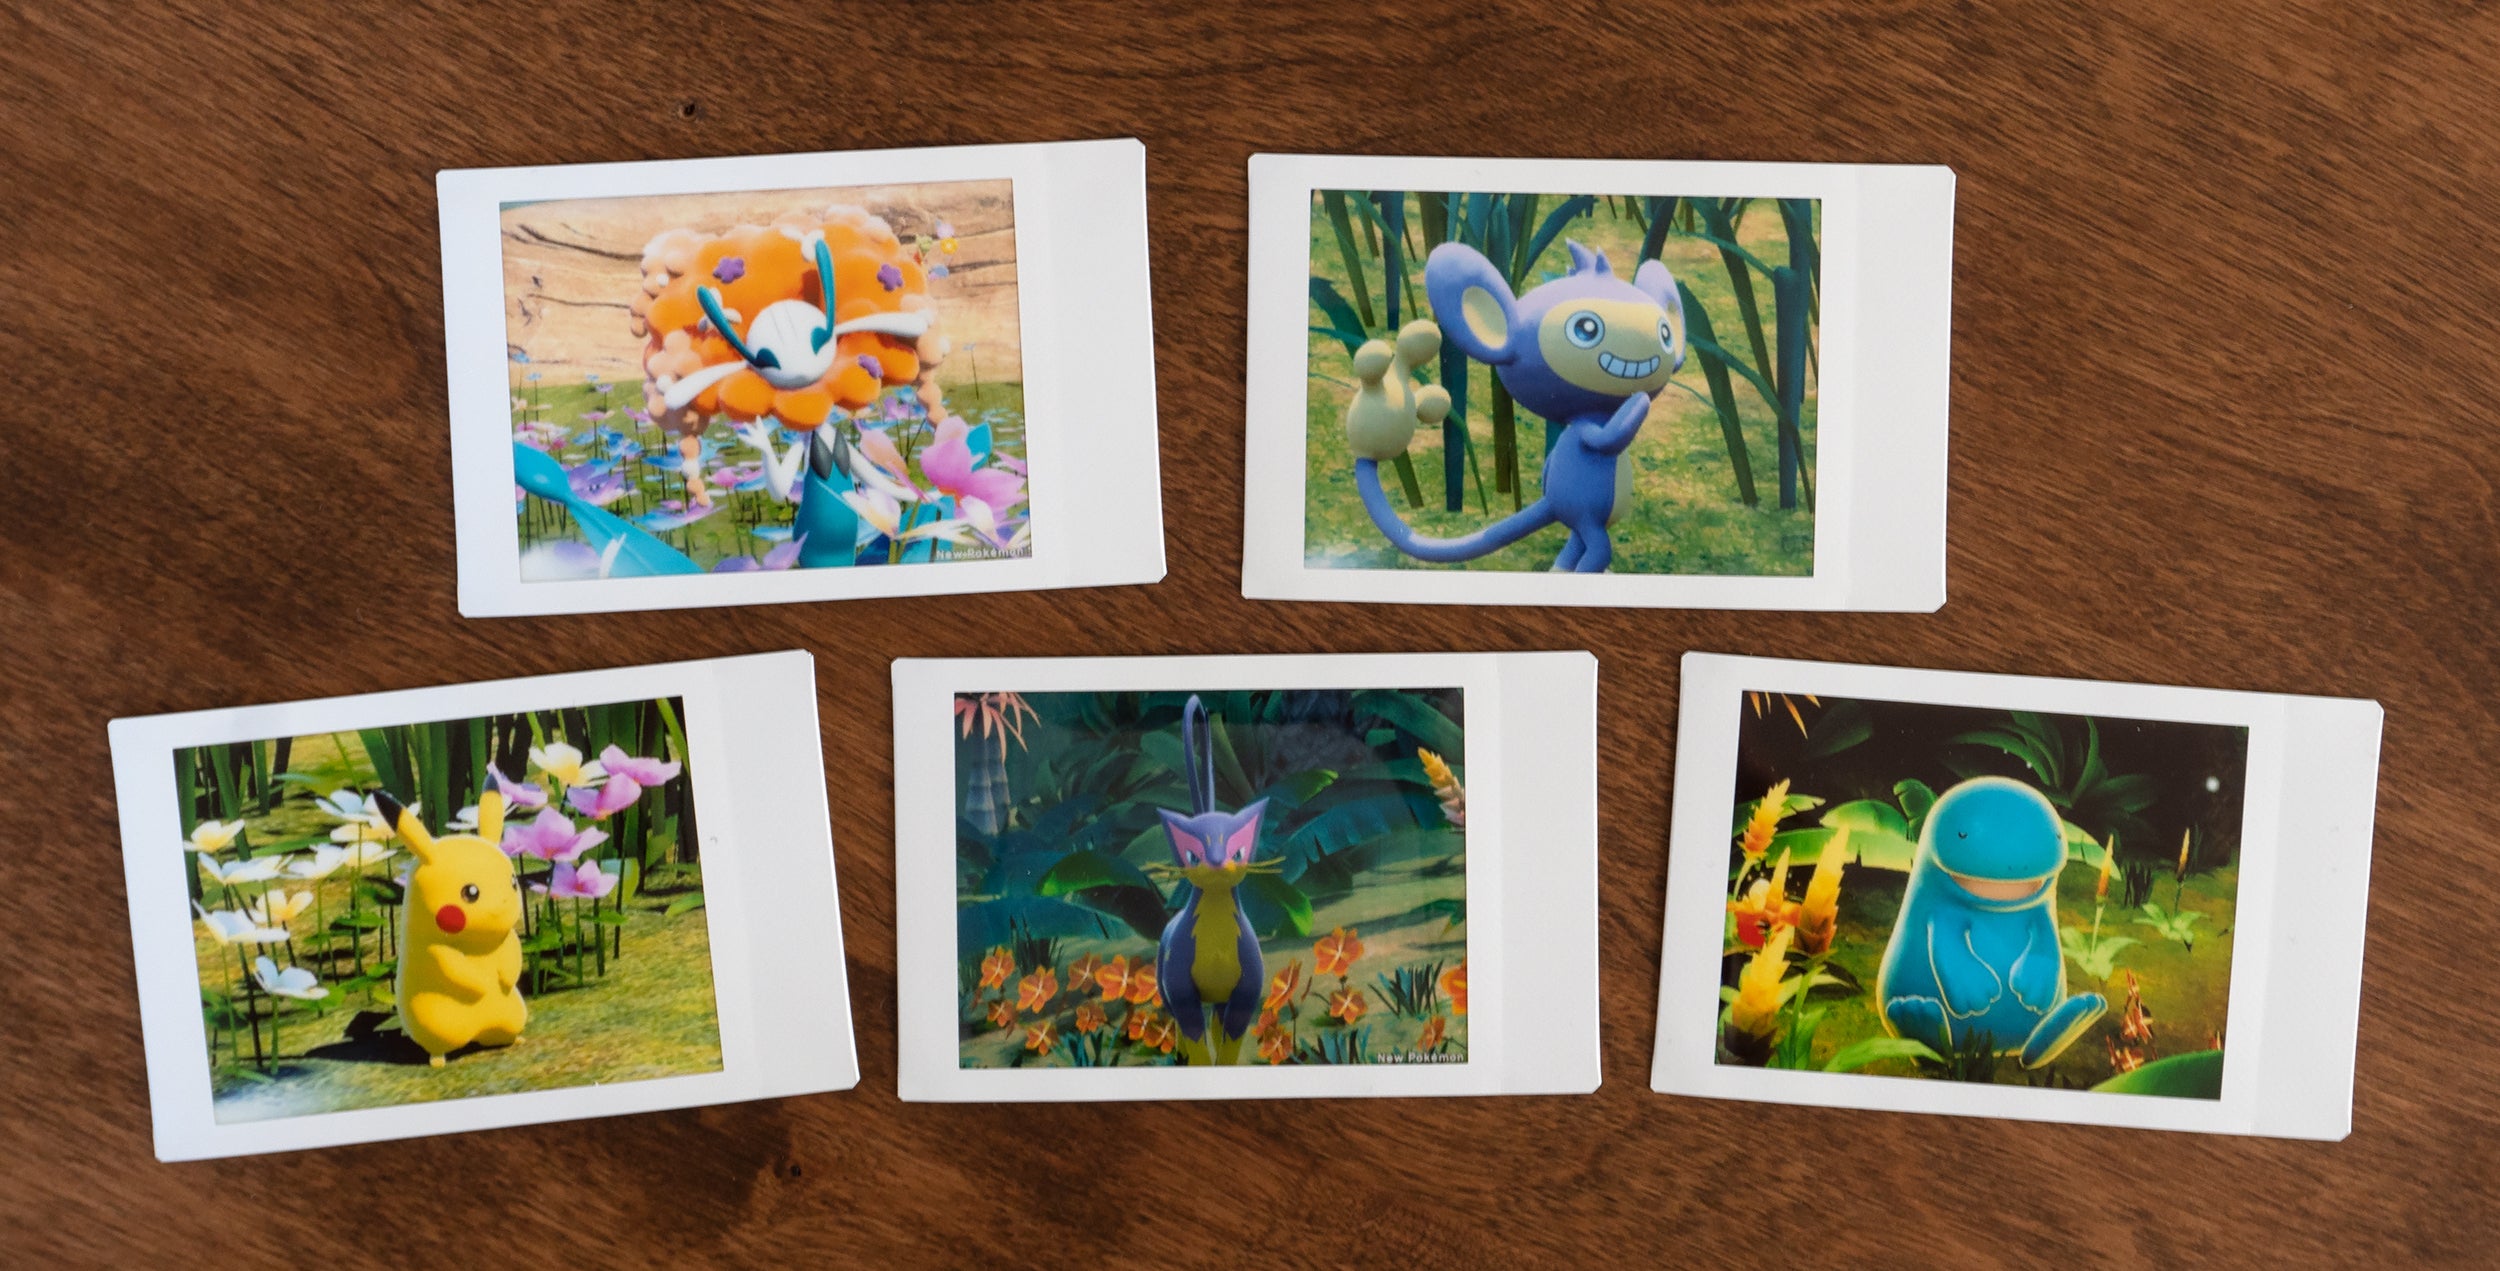 I don't know if it's a great option for kids, but for instant film enthusiasts, the printer has the advantage of sourcing images from almost any device through its mobile app. (Photo: Andrew Liszewski/Gizmodo)